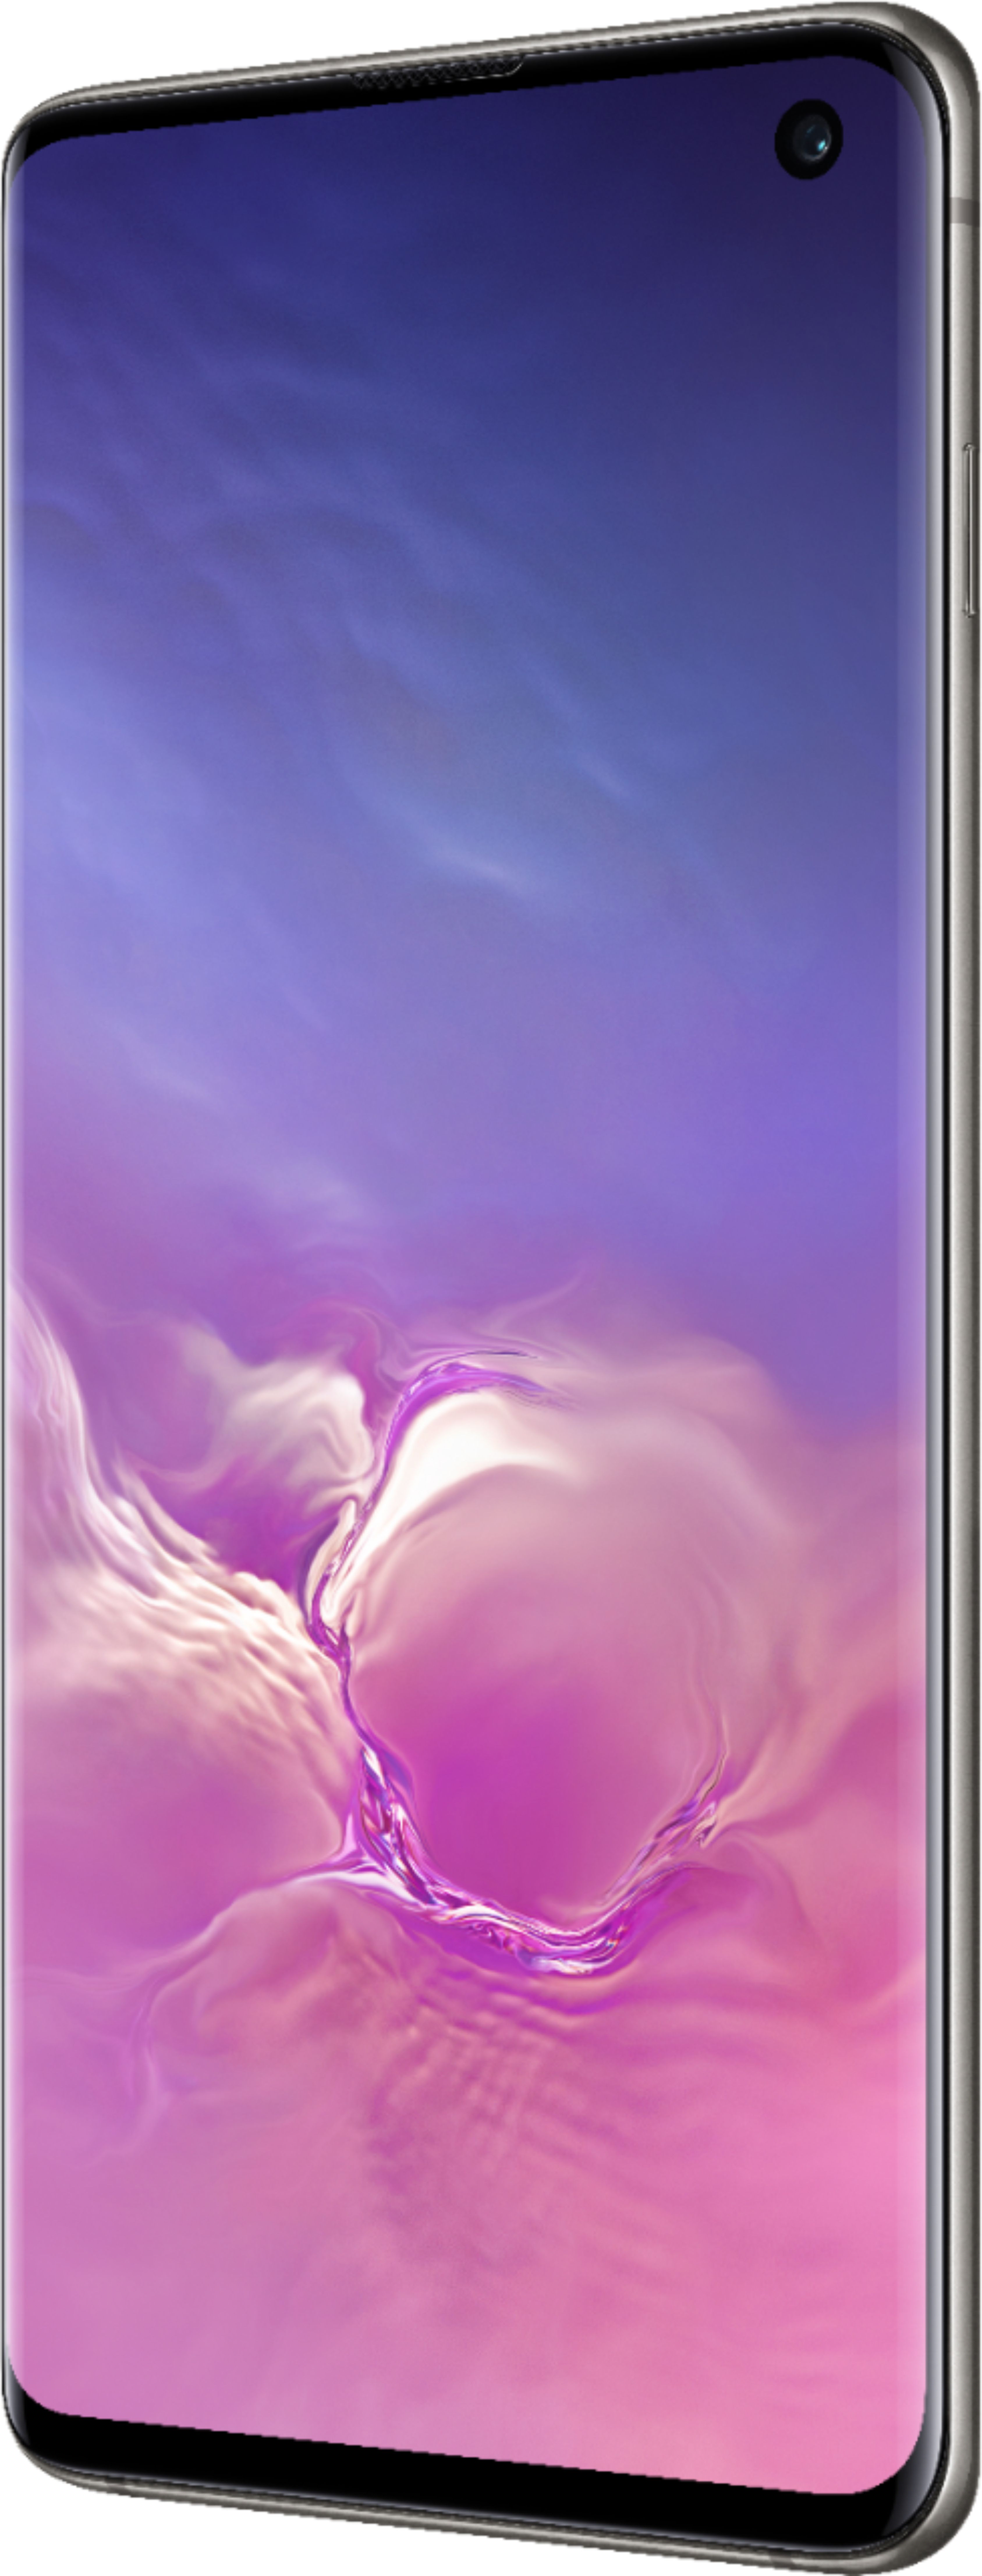 Best Buy: Samsung Galaxy S10 with 128GB Memory Cell Phone Prism ...